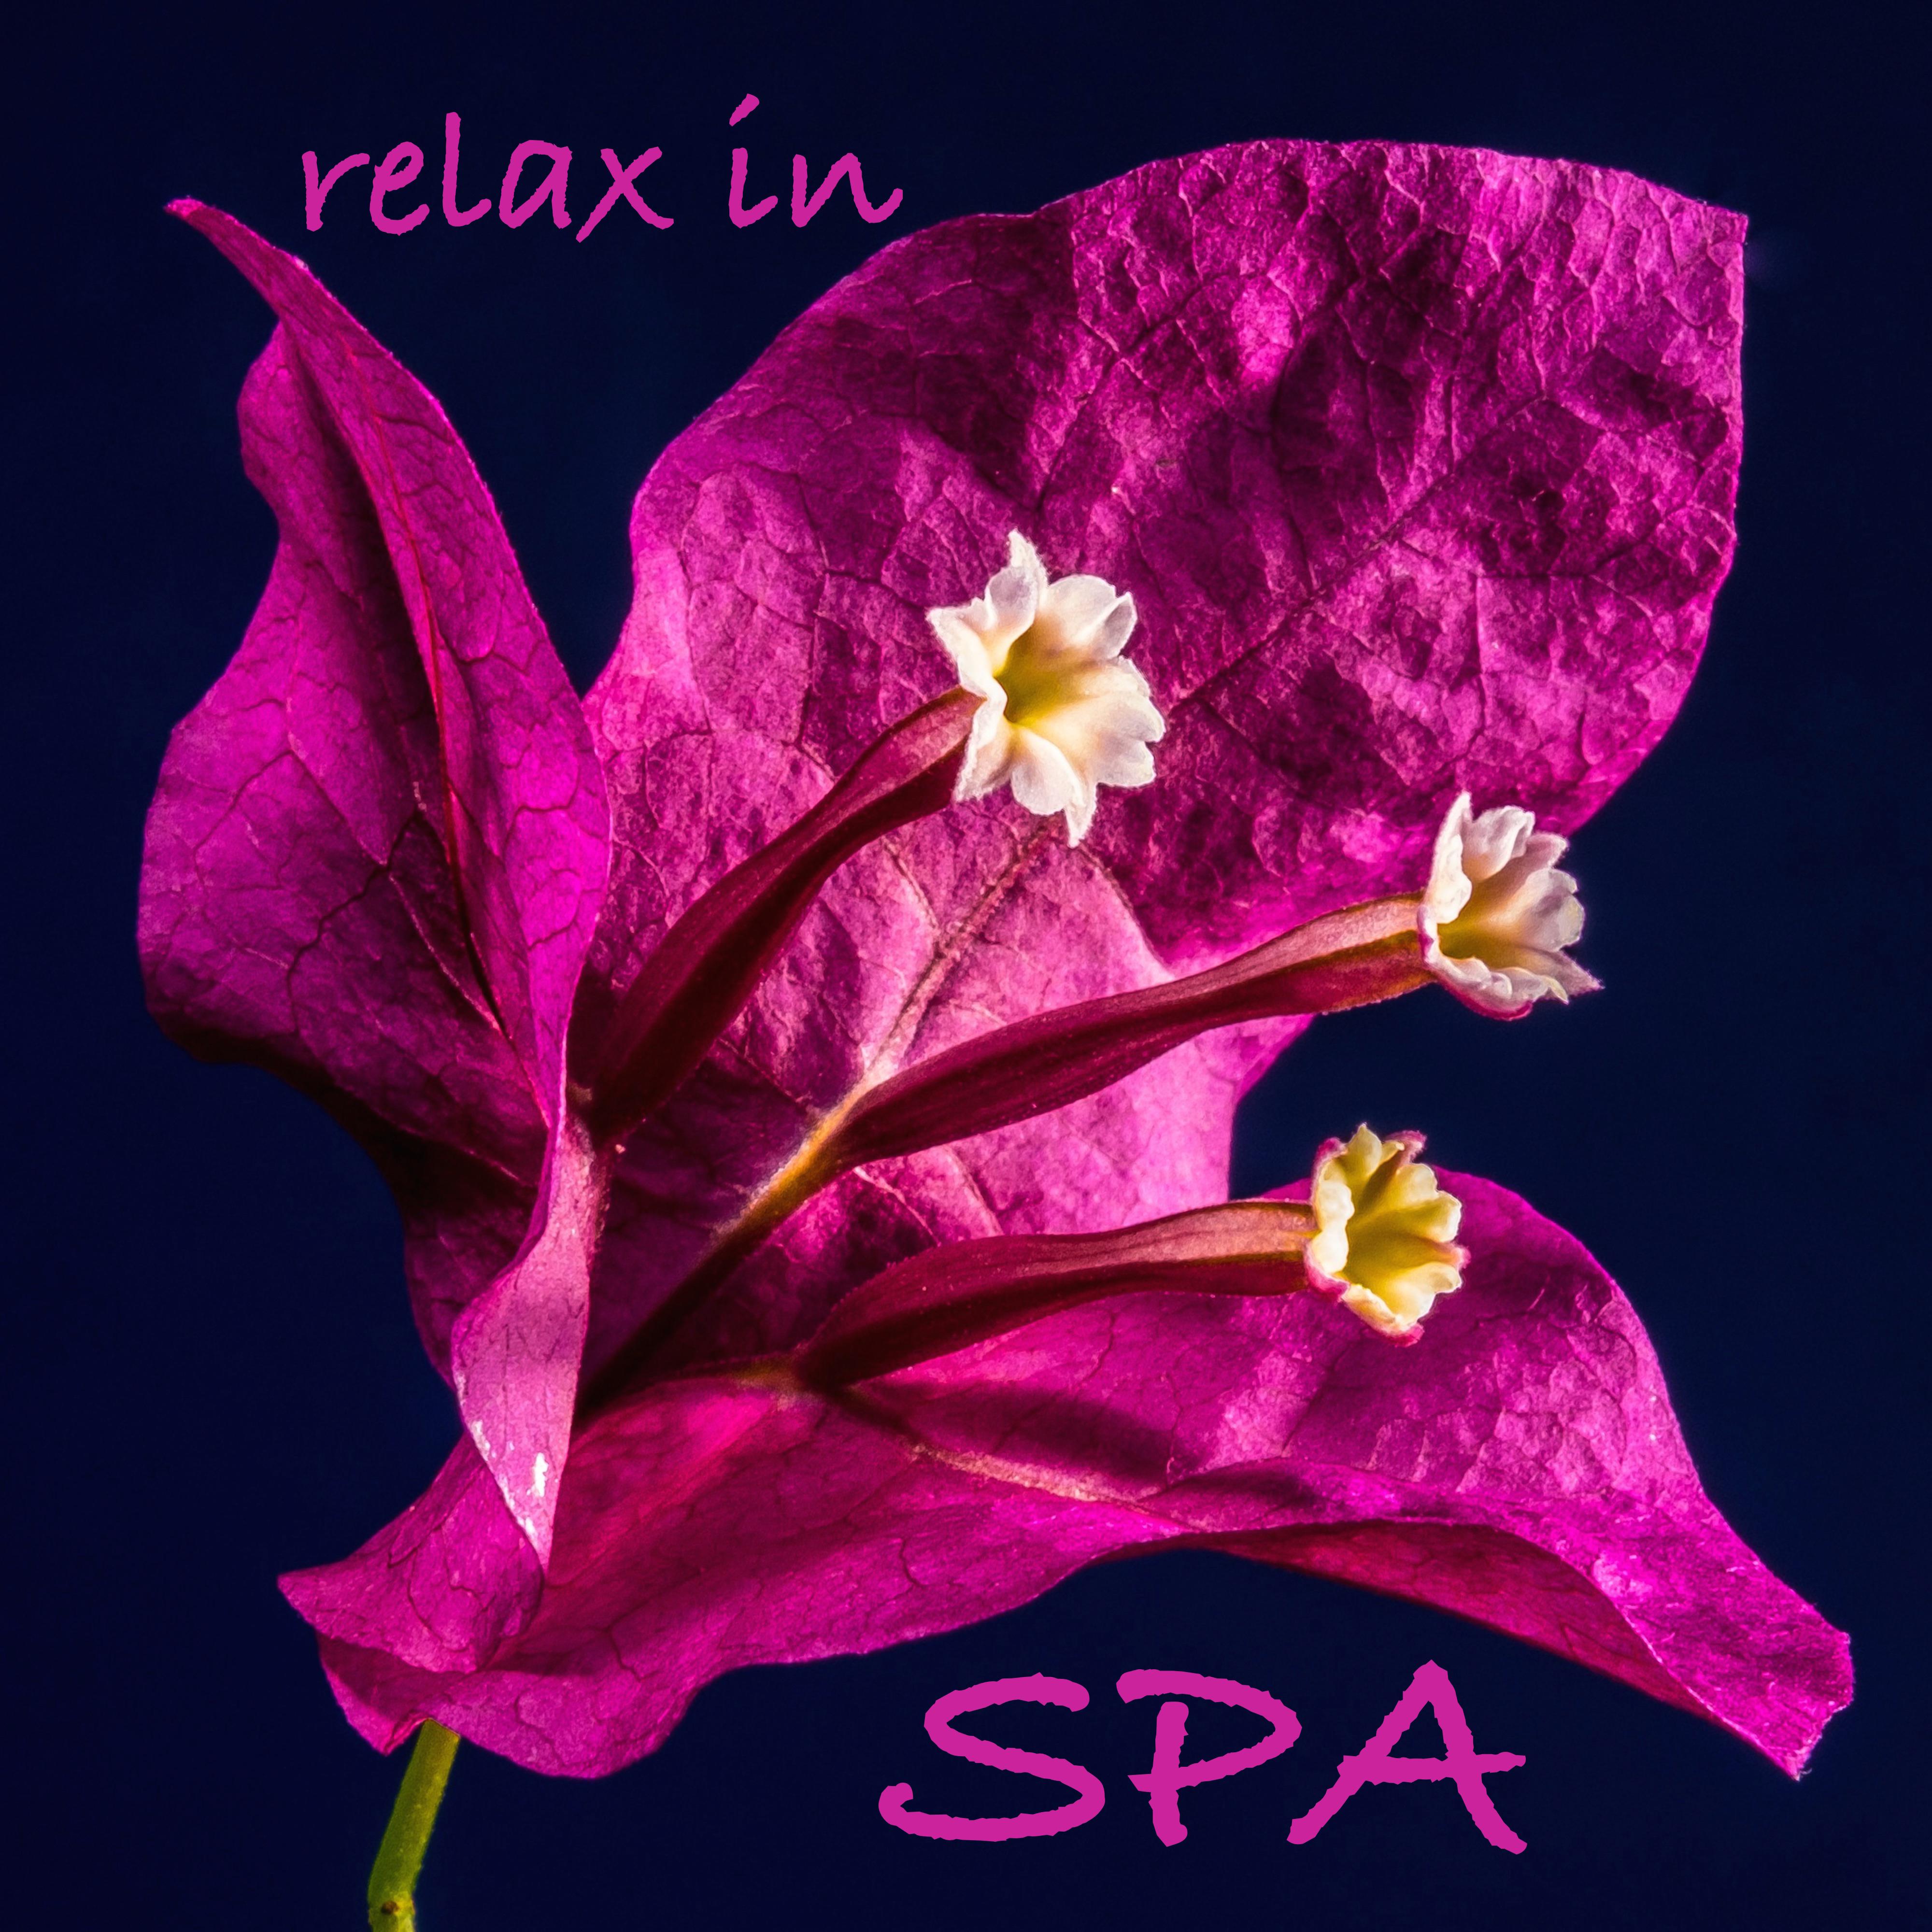 Relax in Spa - Zen Spa Music for Mindfulness and Relaxation